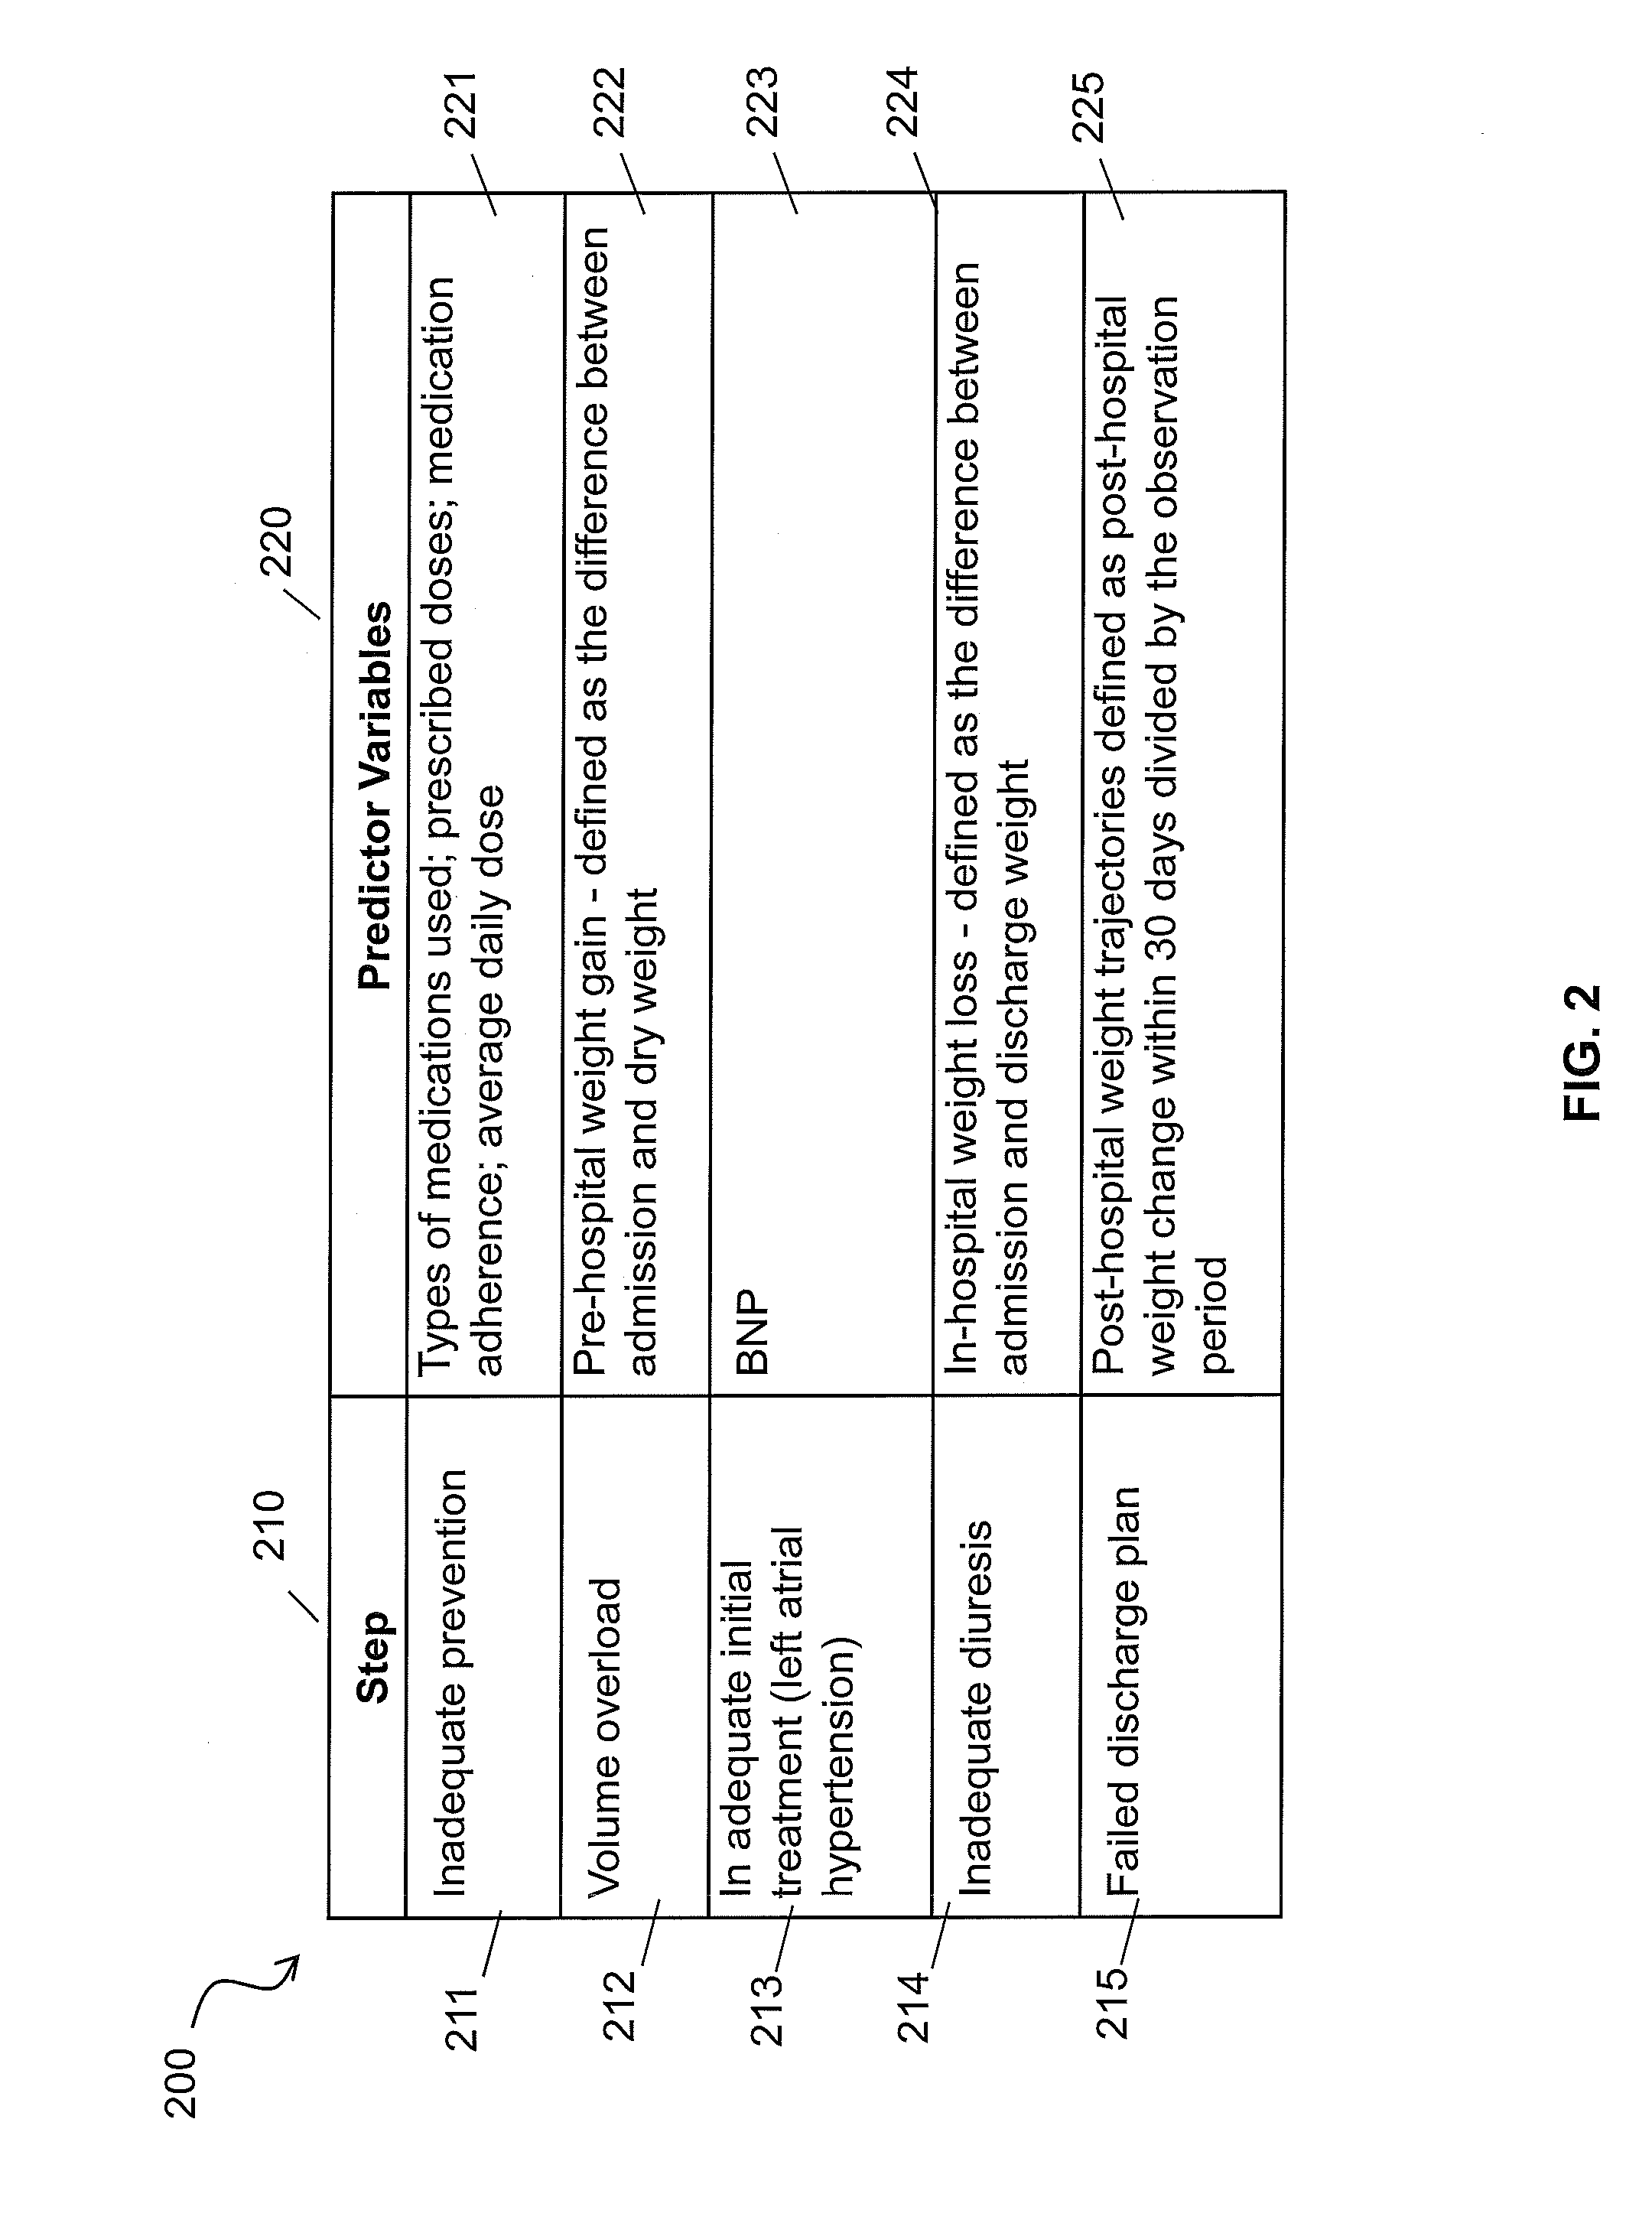 System and methods for managing congestive heart failure